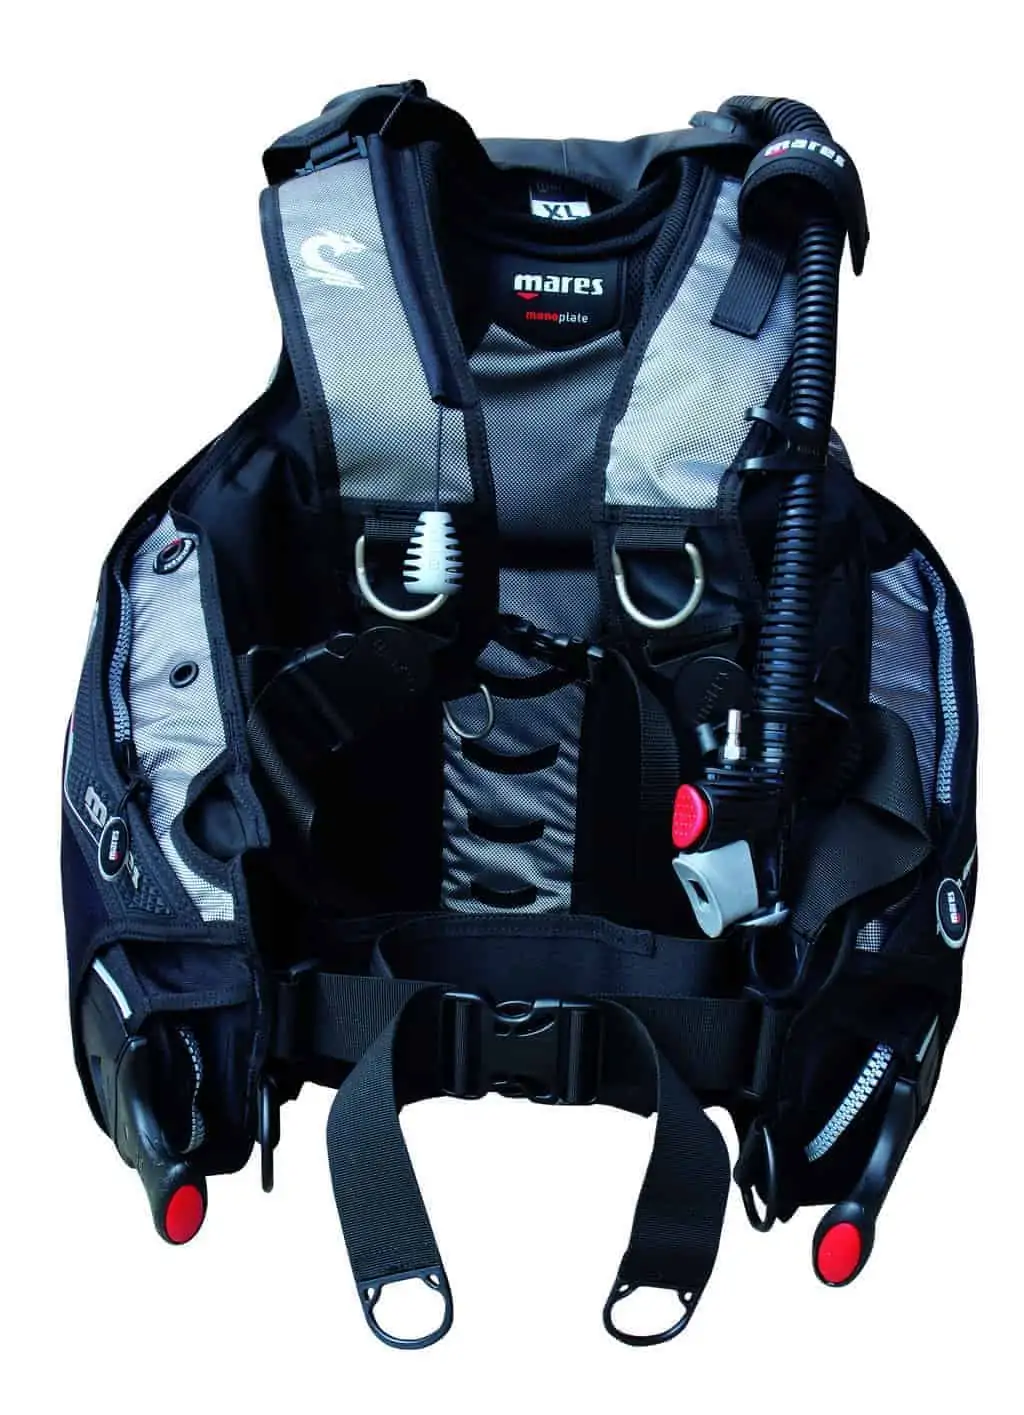 The Dragon SLS sits near the top of our price bracket, but you do get a lot of BCD for your money.